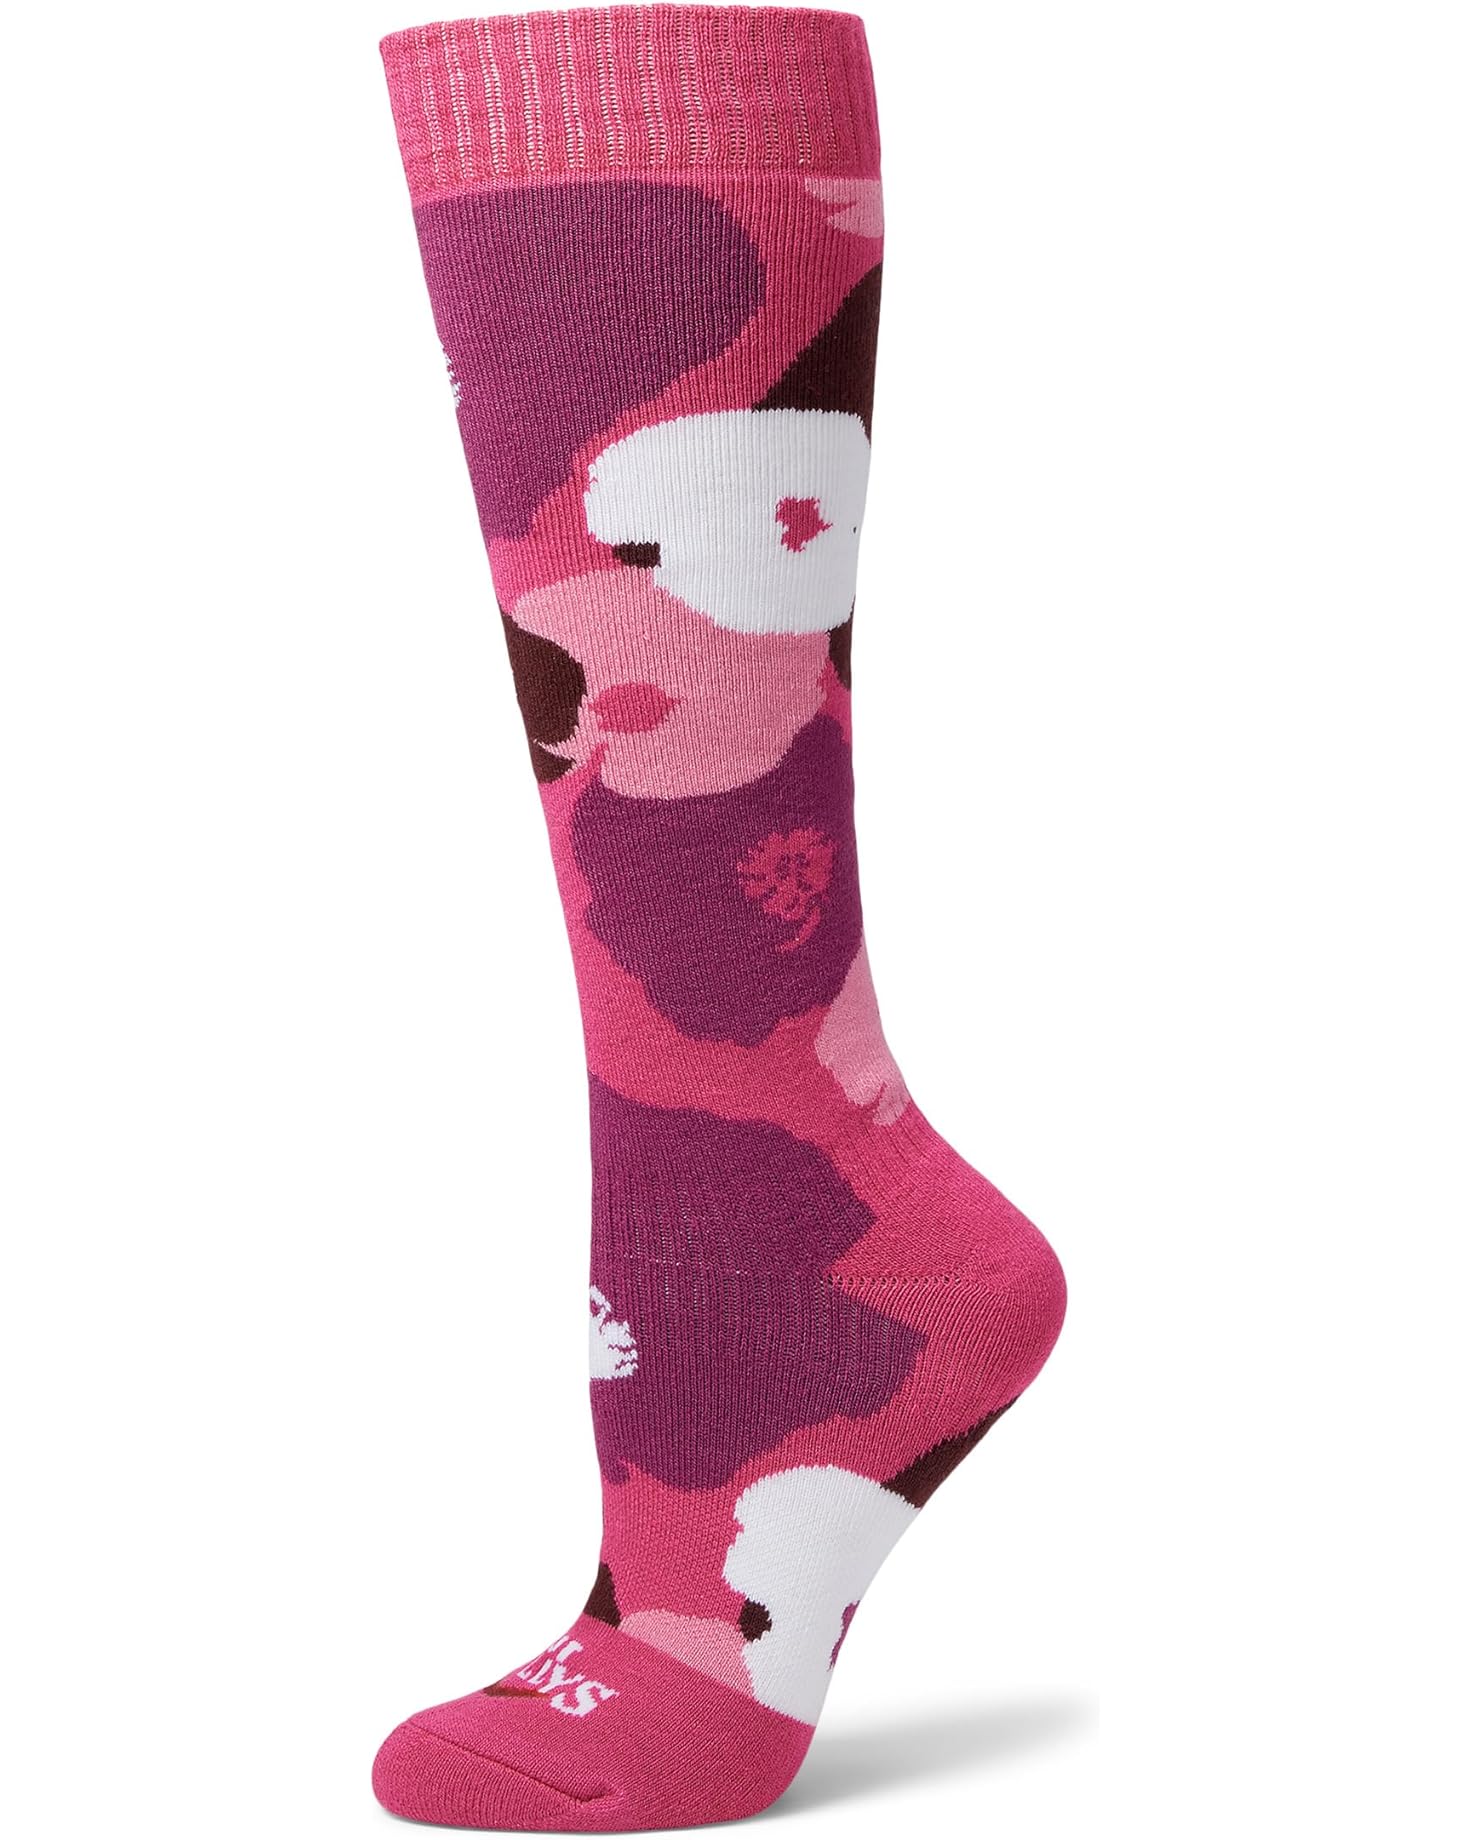 Hot Chillys Mid Volume Sock Poppies - Women's Pink, white and purple print